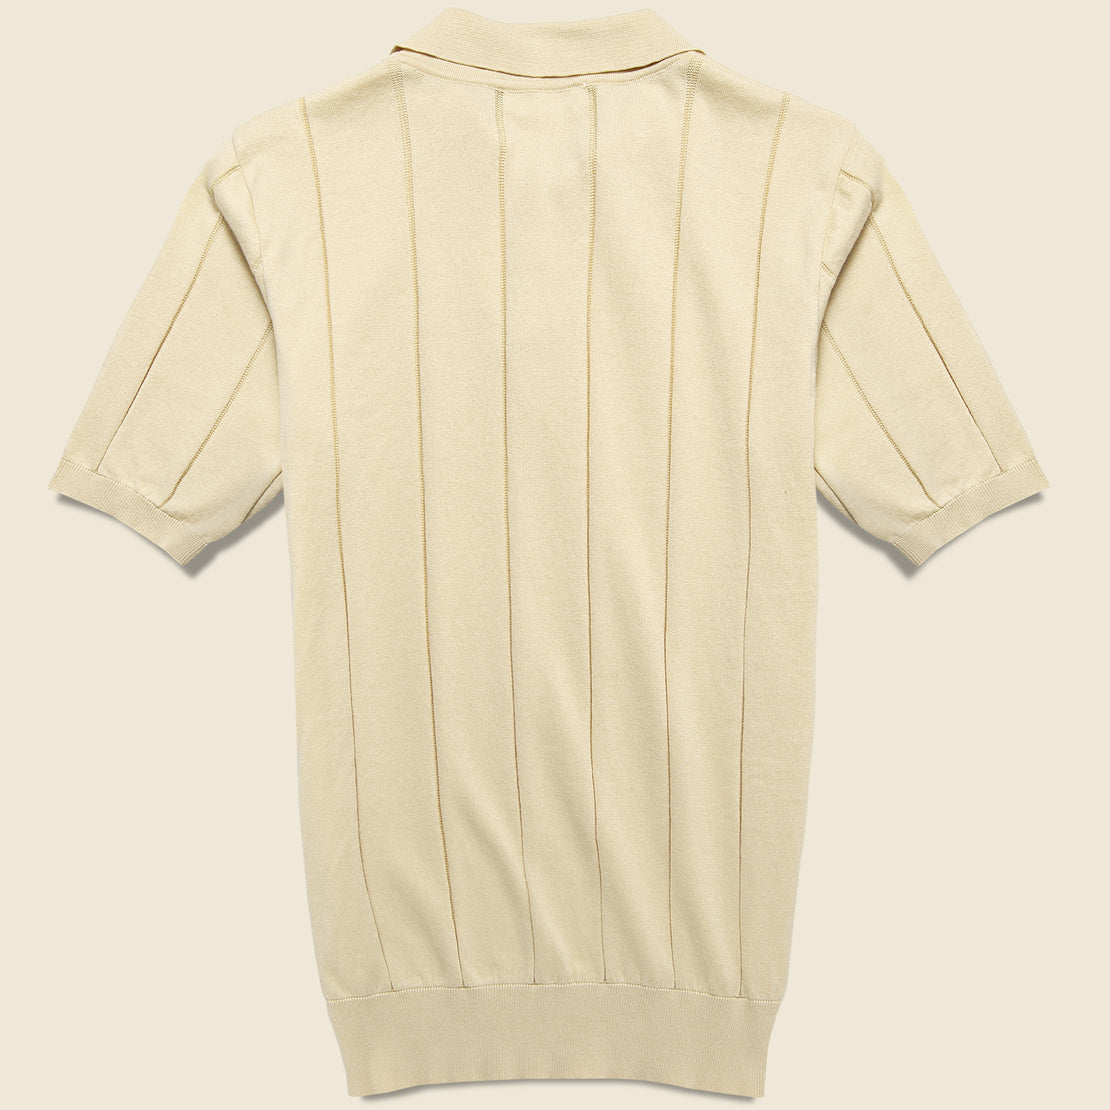 Knit Jacobs Polo - White - Far Afield - STAG Provisions - Tops - S/S Knit